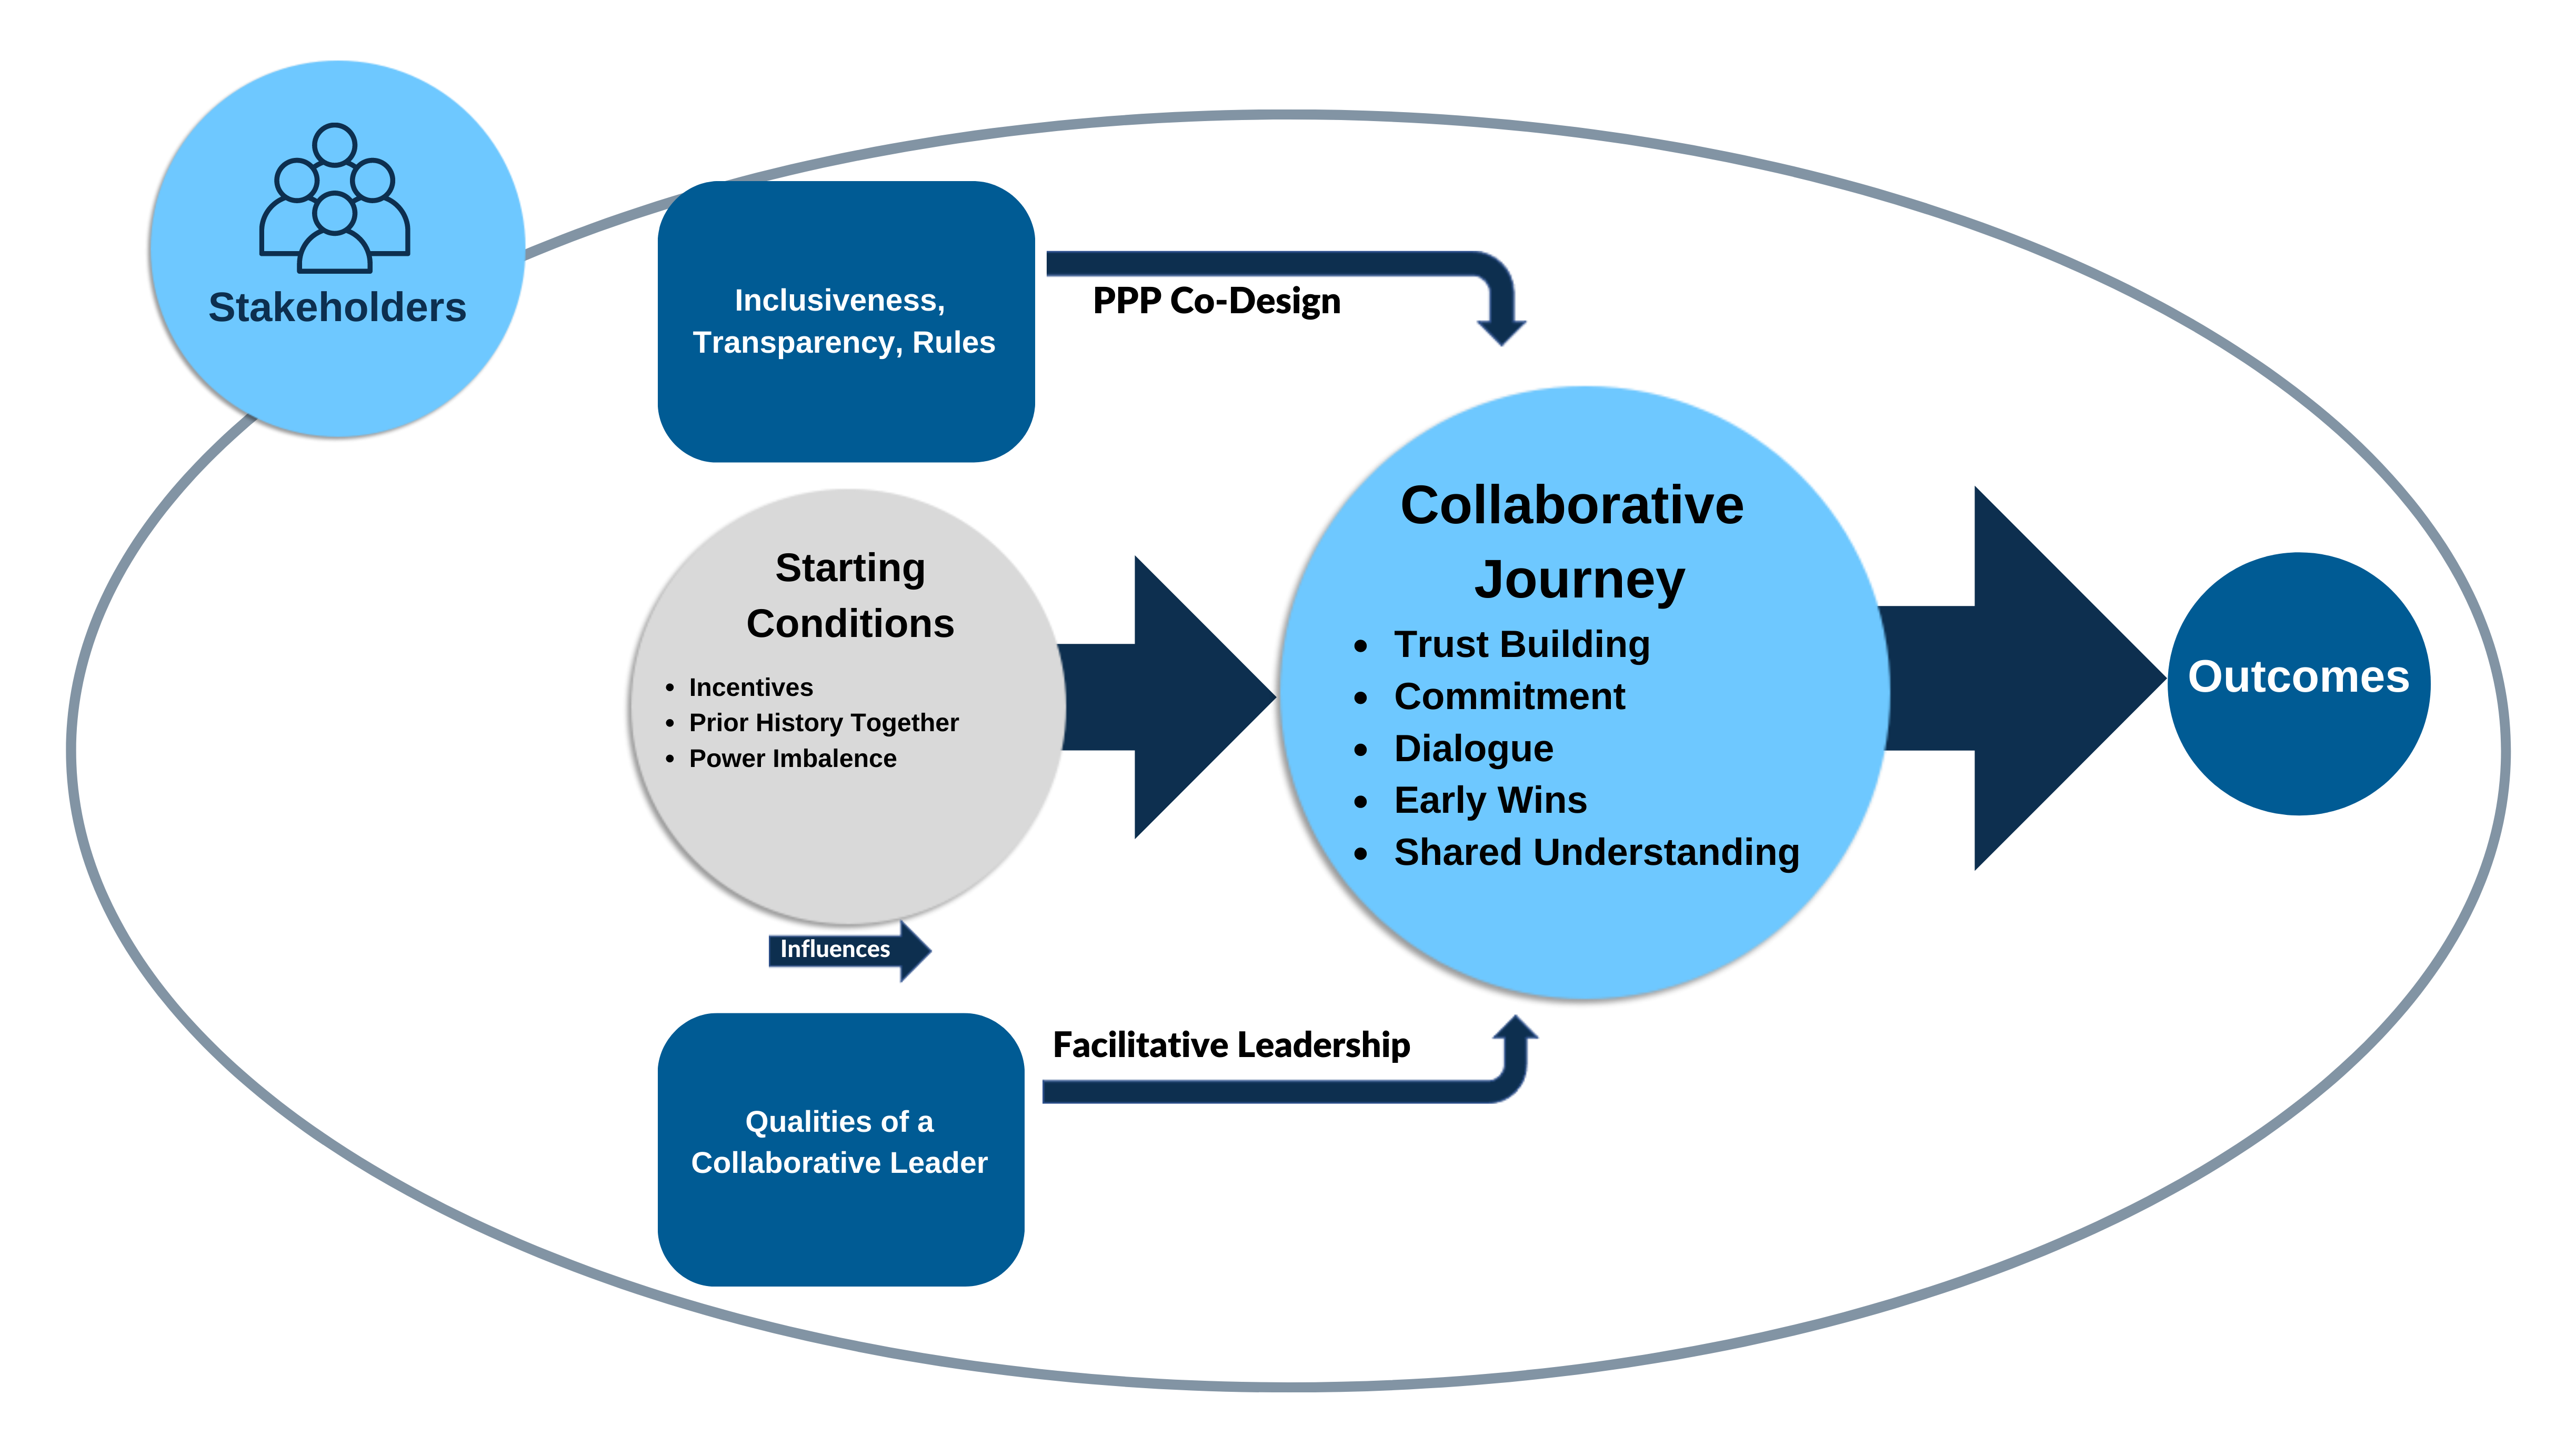 PPP environment including a graphic representation of the collaborative journey with stakeholders